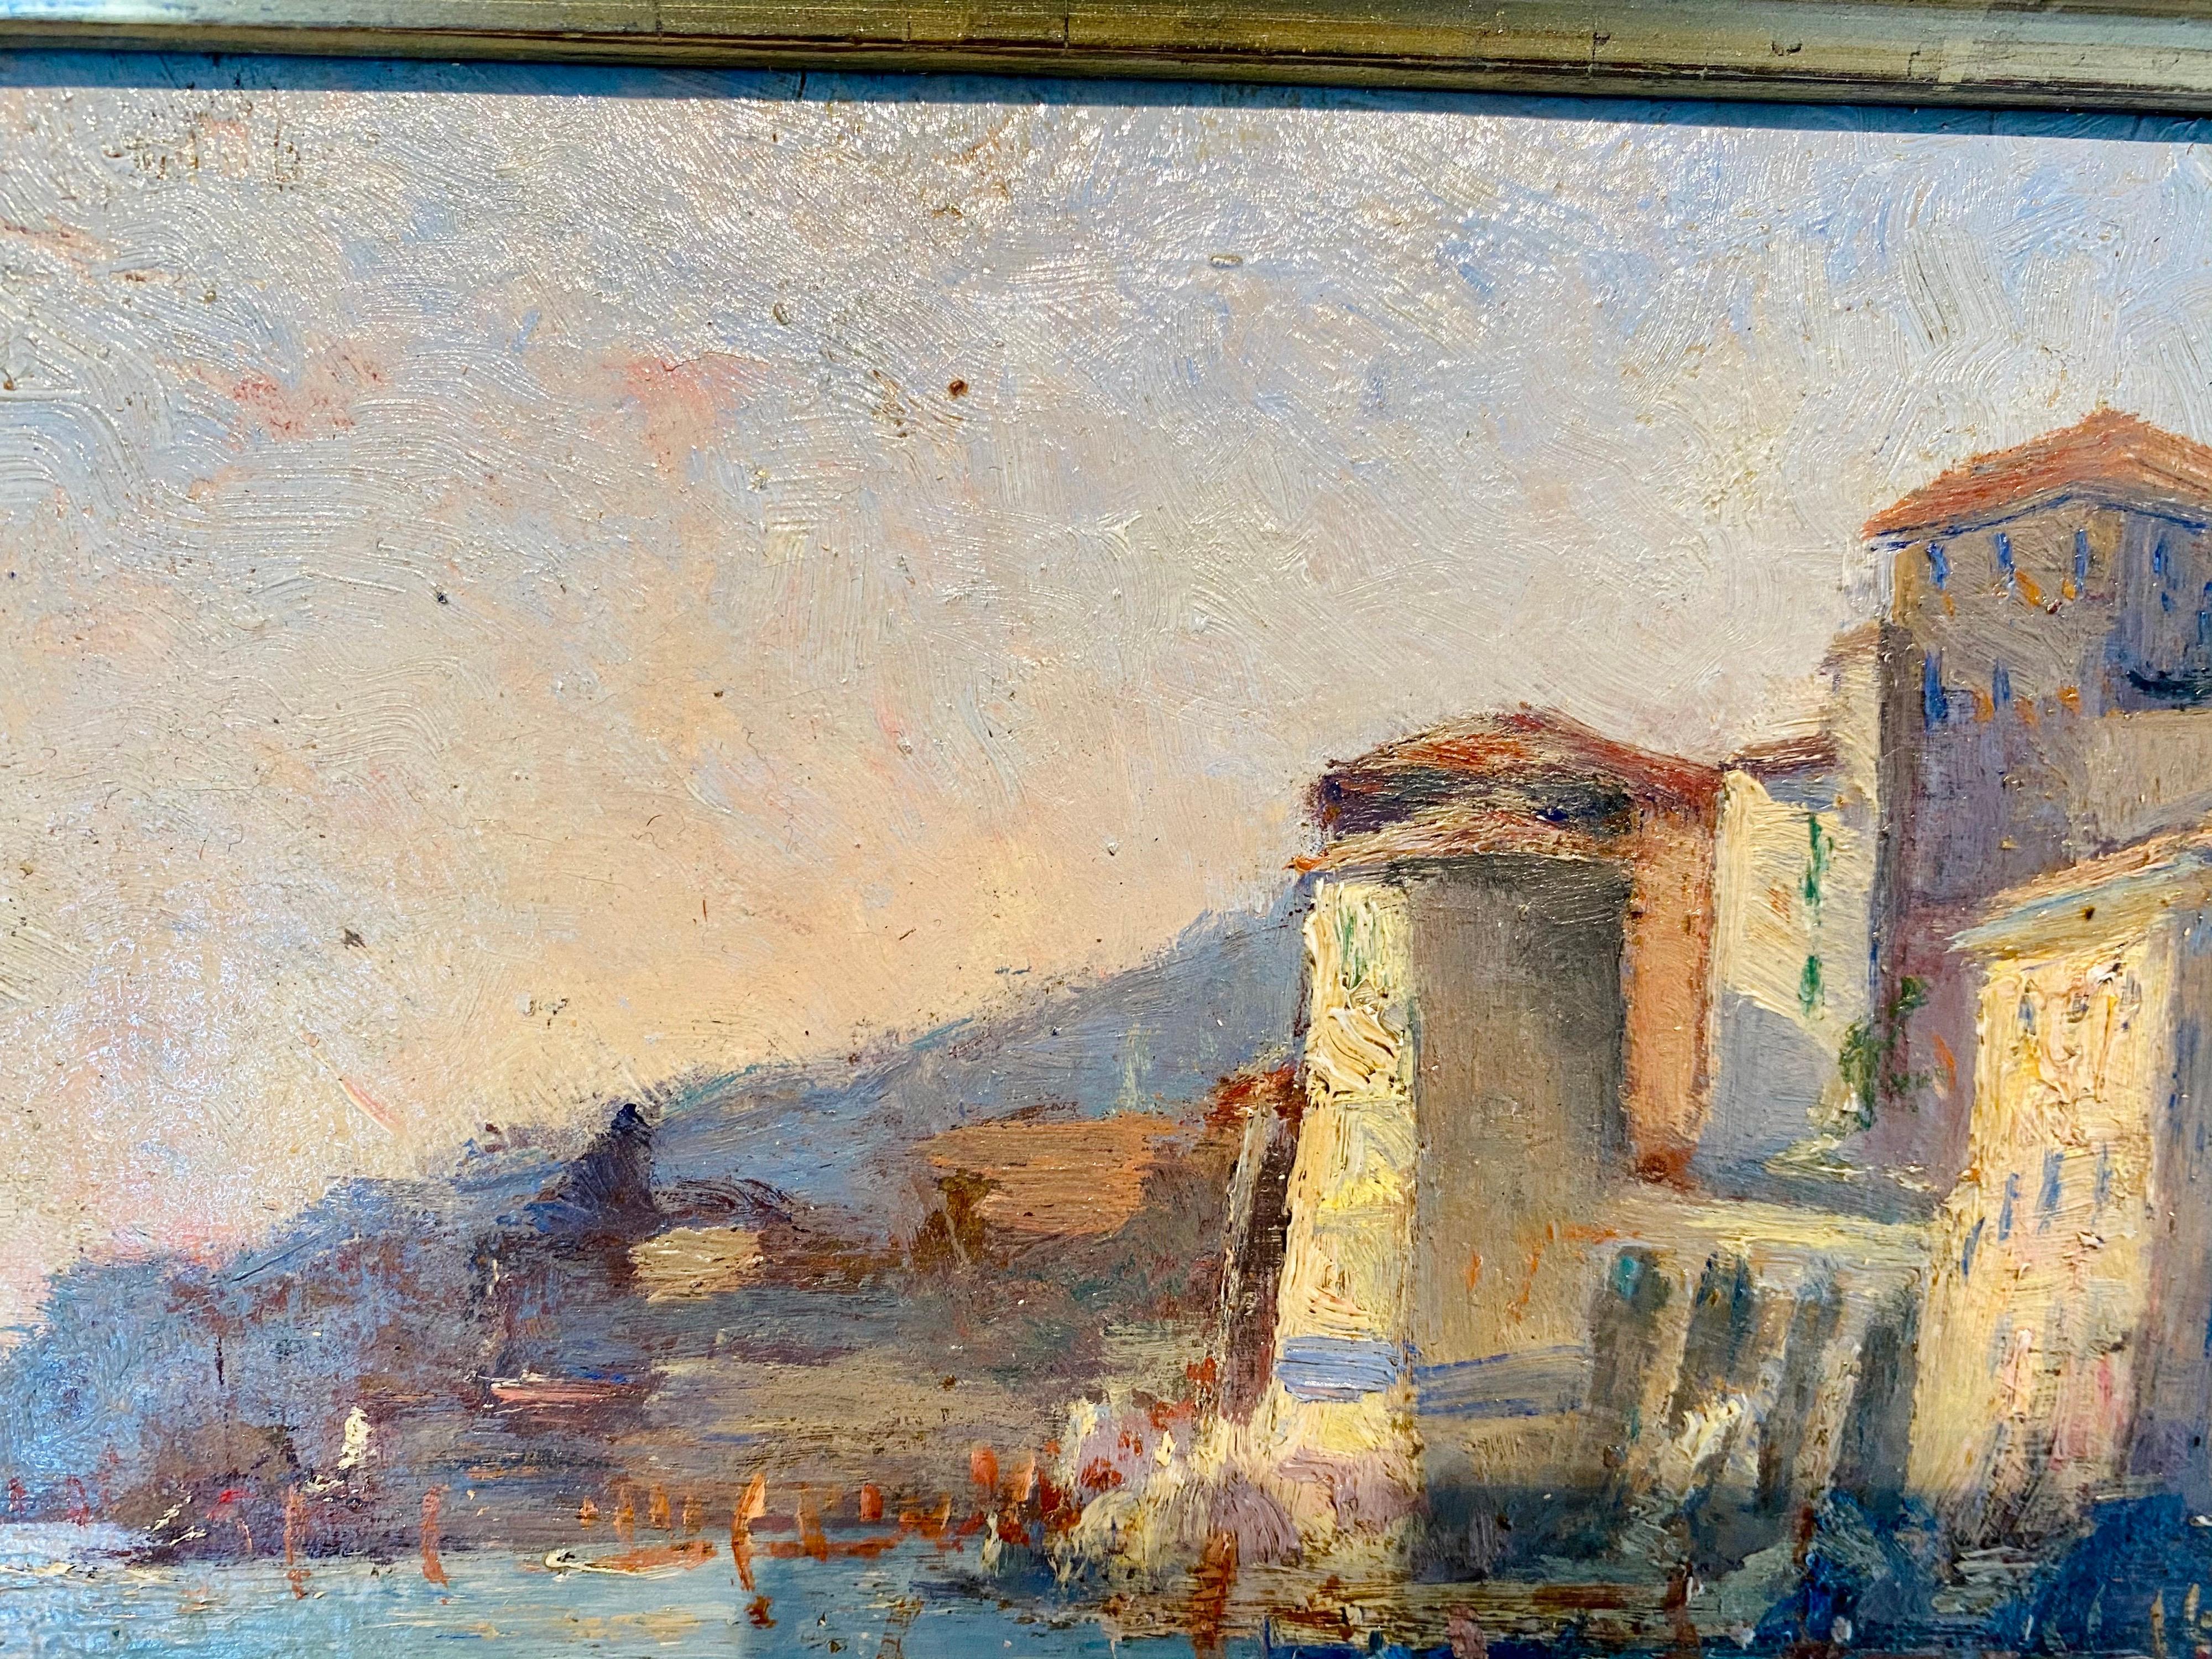 Beautifully vibrant French impressionist painting depicting a seaside village and harbour along the Mediterranean at dusk. Housed in a wonderfully matching frame. One can delightfully notice the warm light of the setting sun reflecting on the